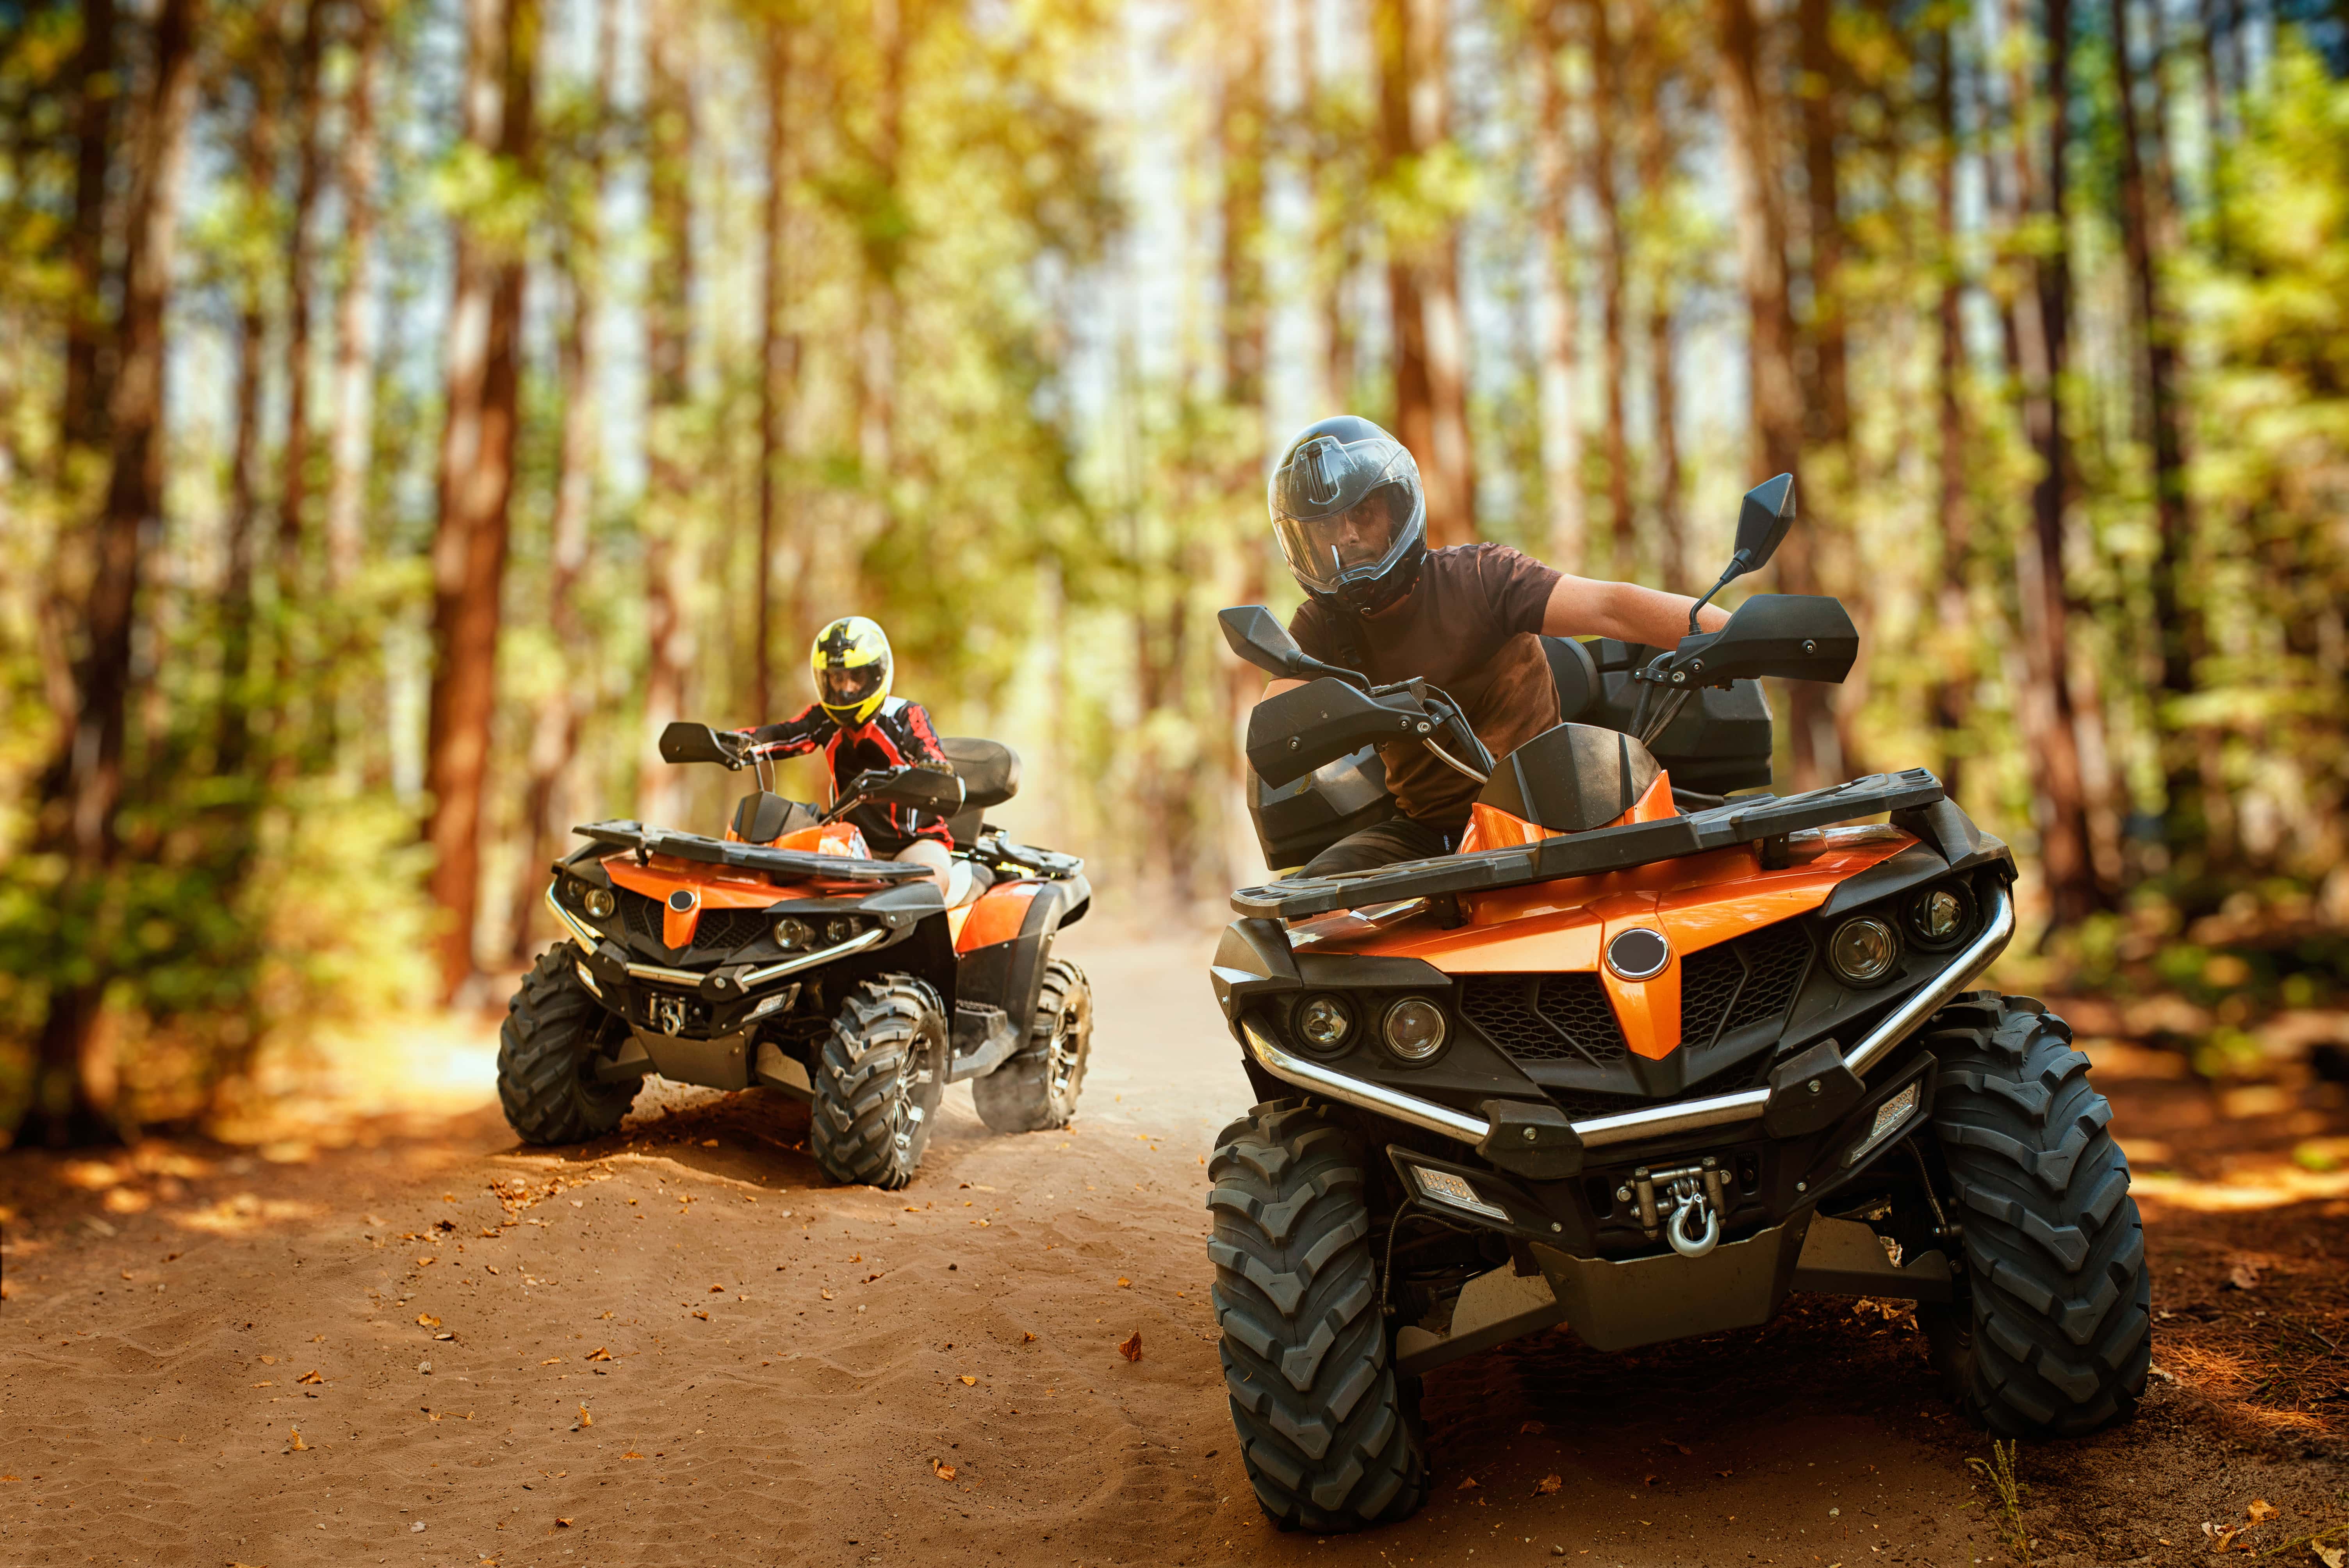 two-atv-riders-speed-race-in-forest-front-view